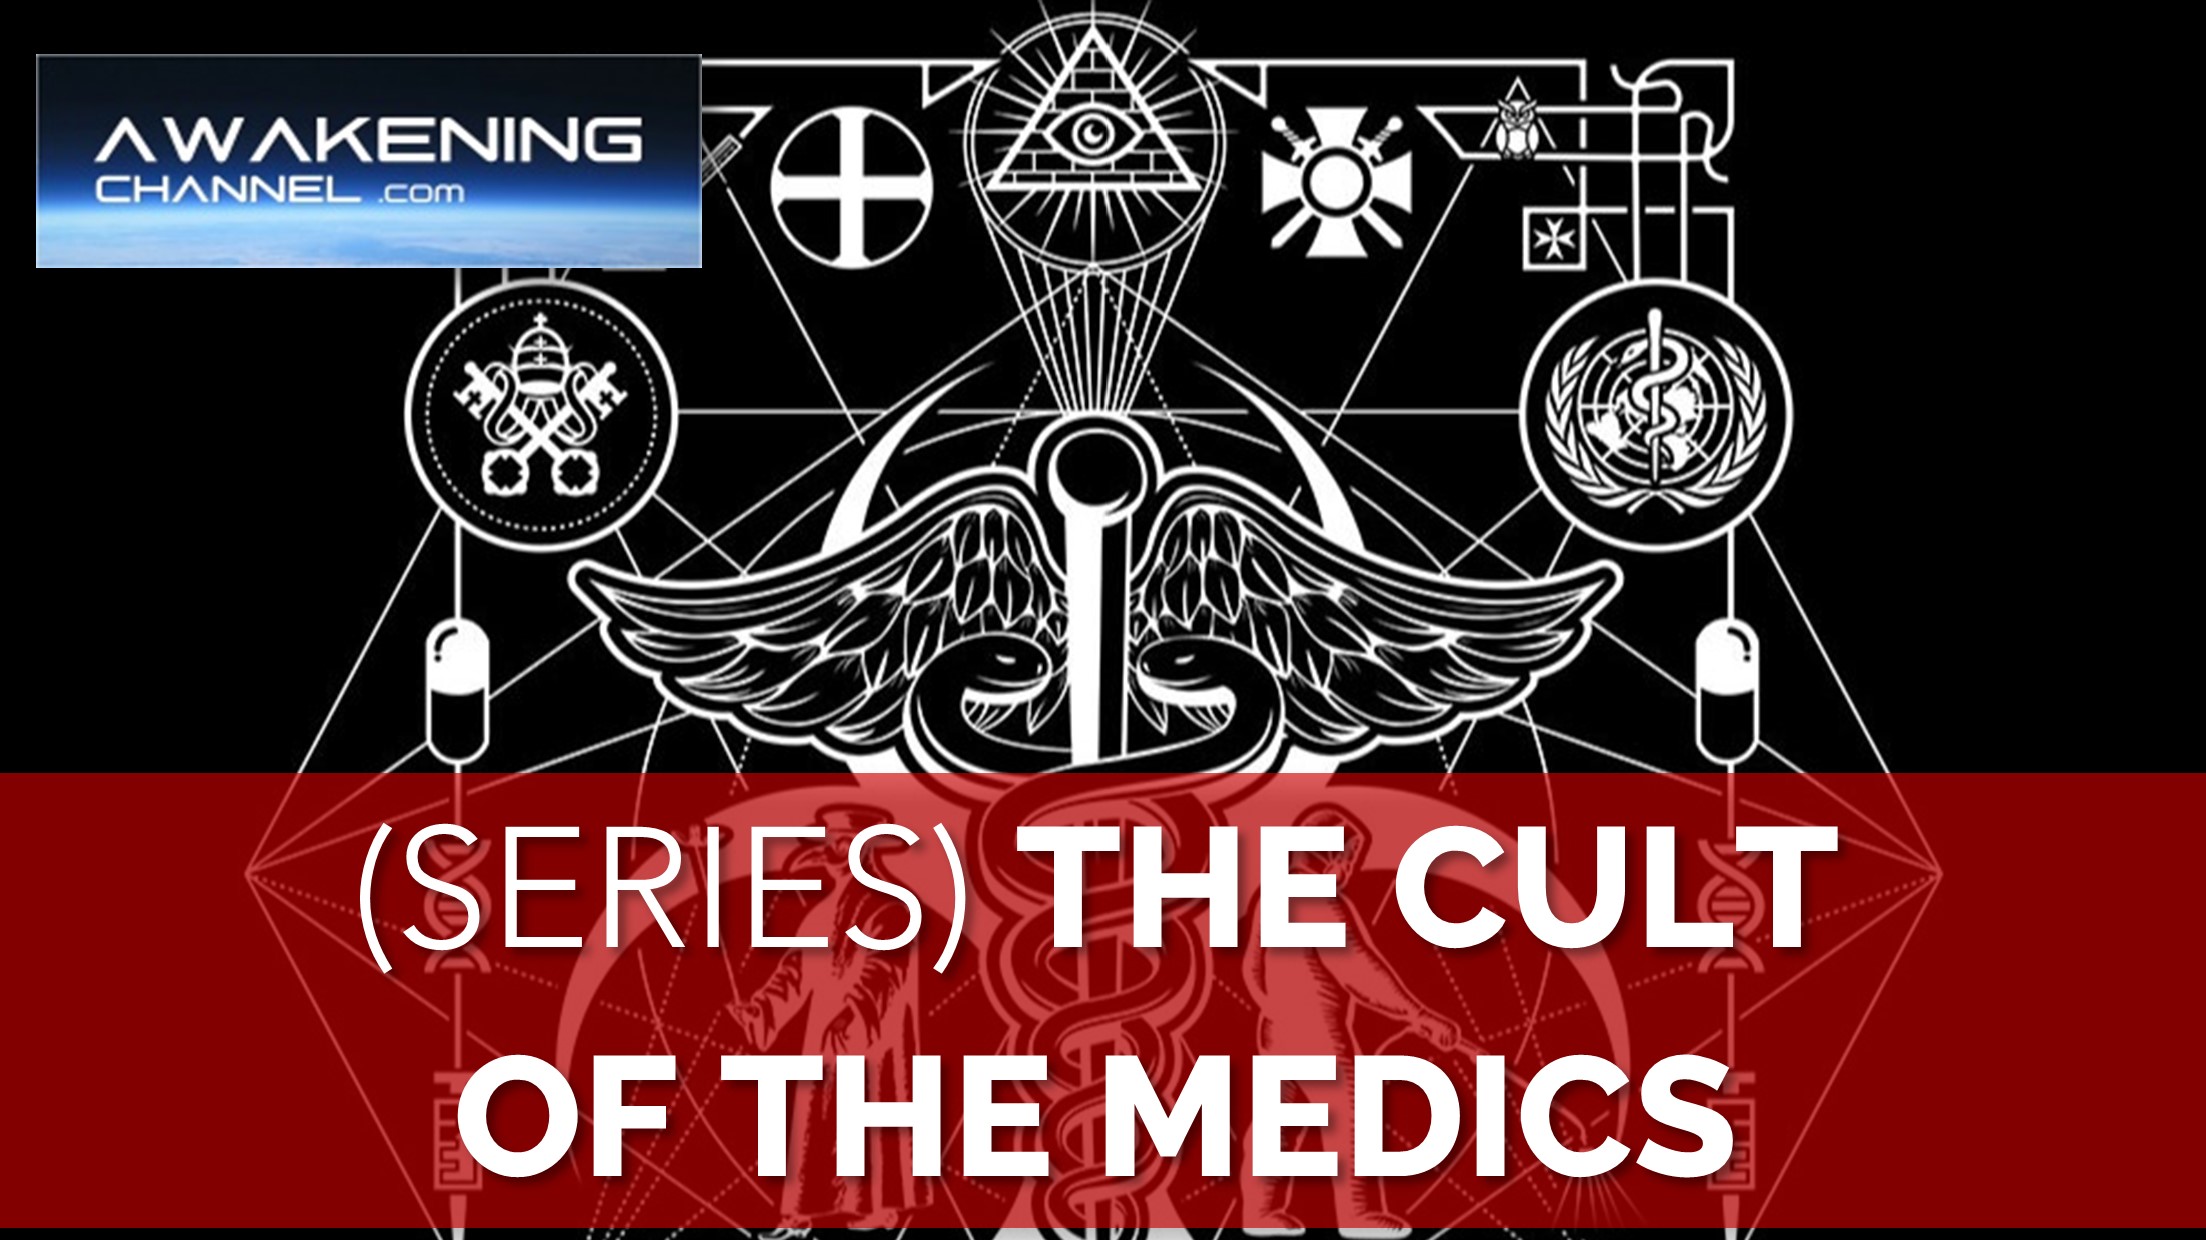 THE CULT OF THE MEDICS (SERIES)